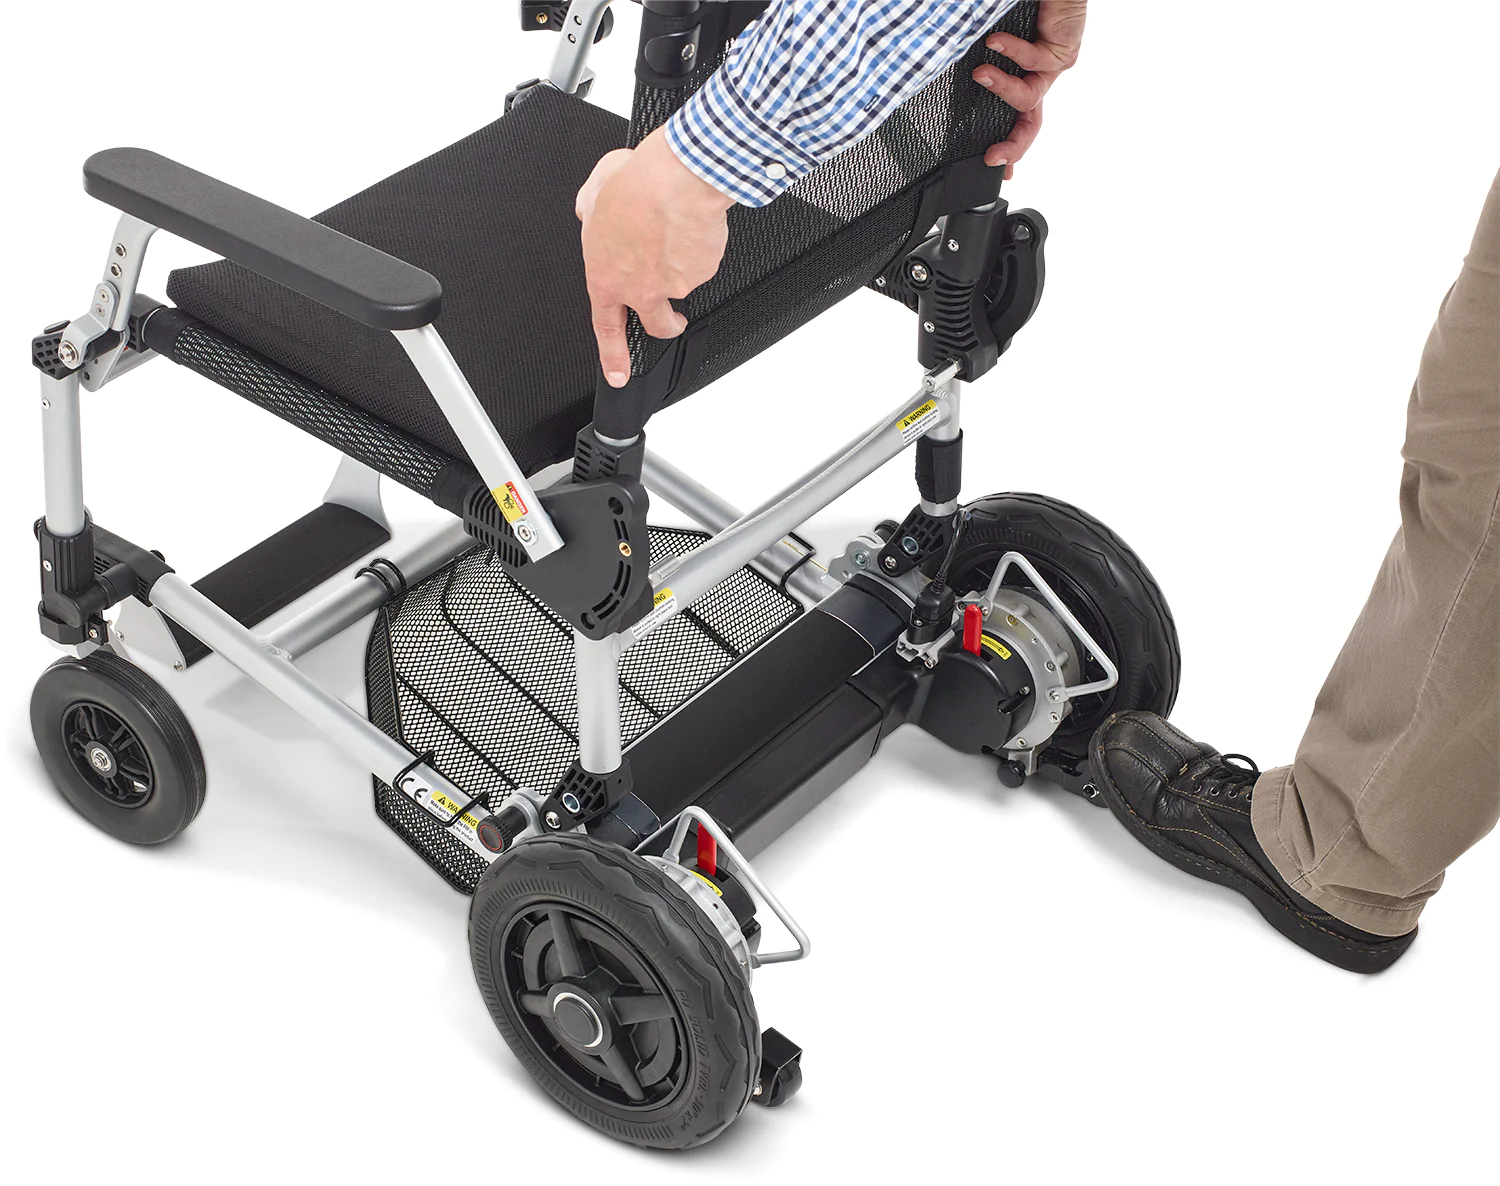 Journey Zoomer Lightweight Power Folding Chair With One-Handed Control